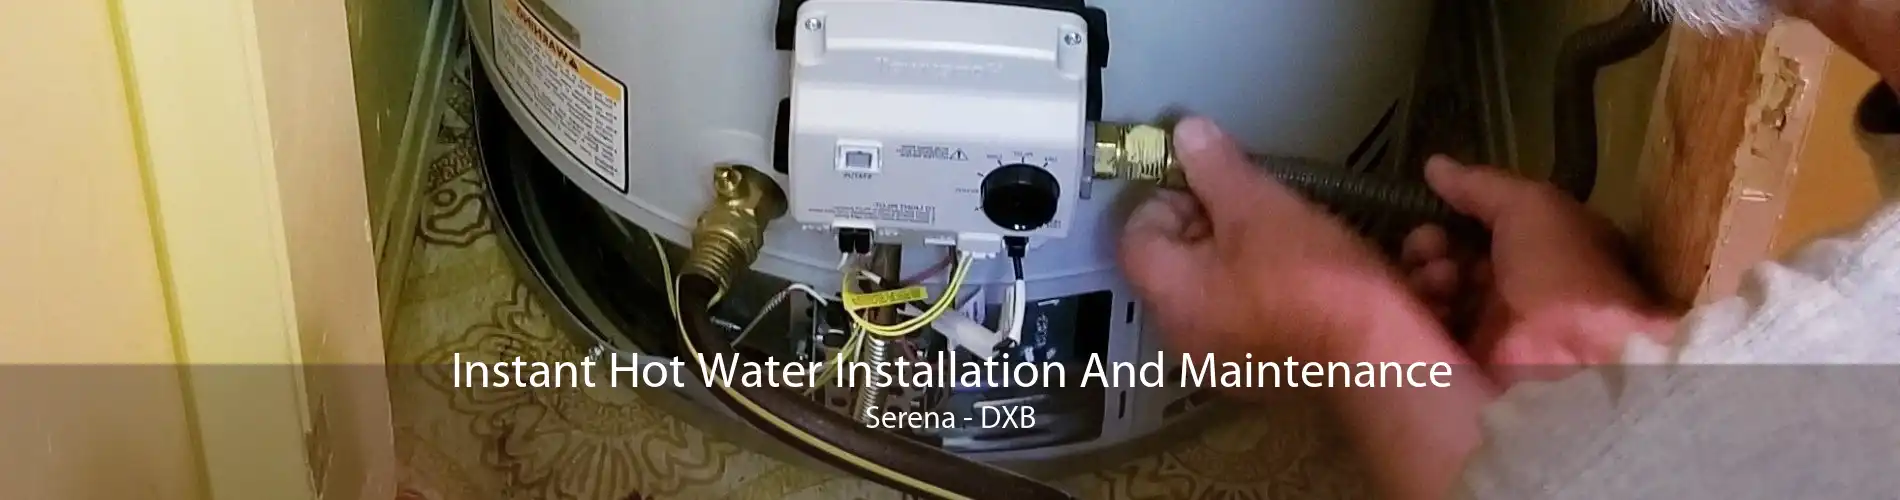 Instant Hot Water Installation And Maintenance Serena - DXB